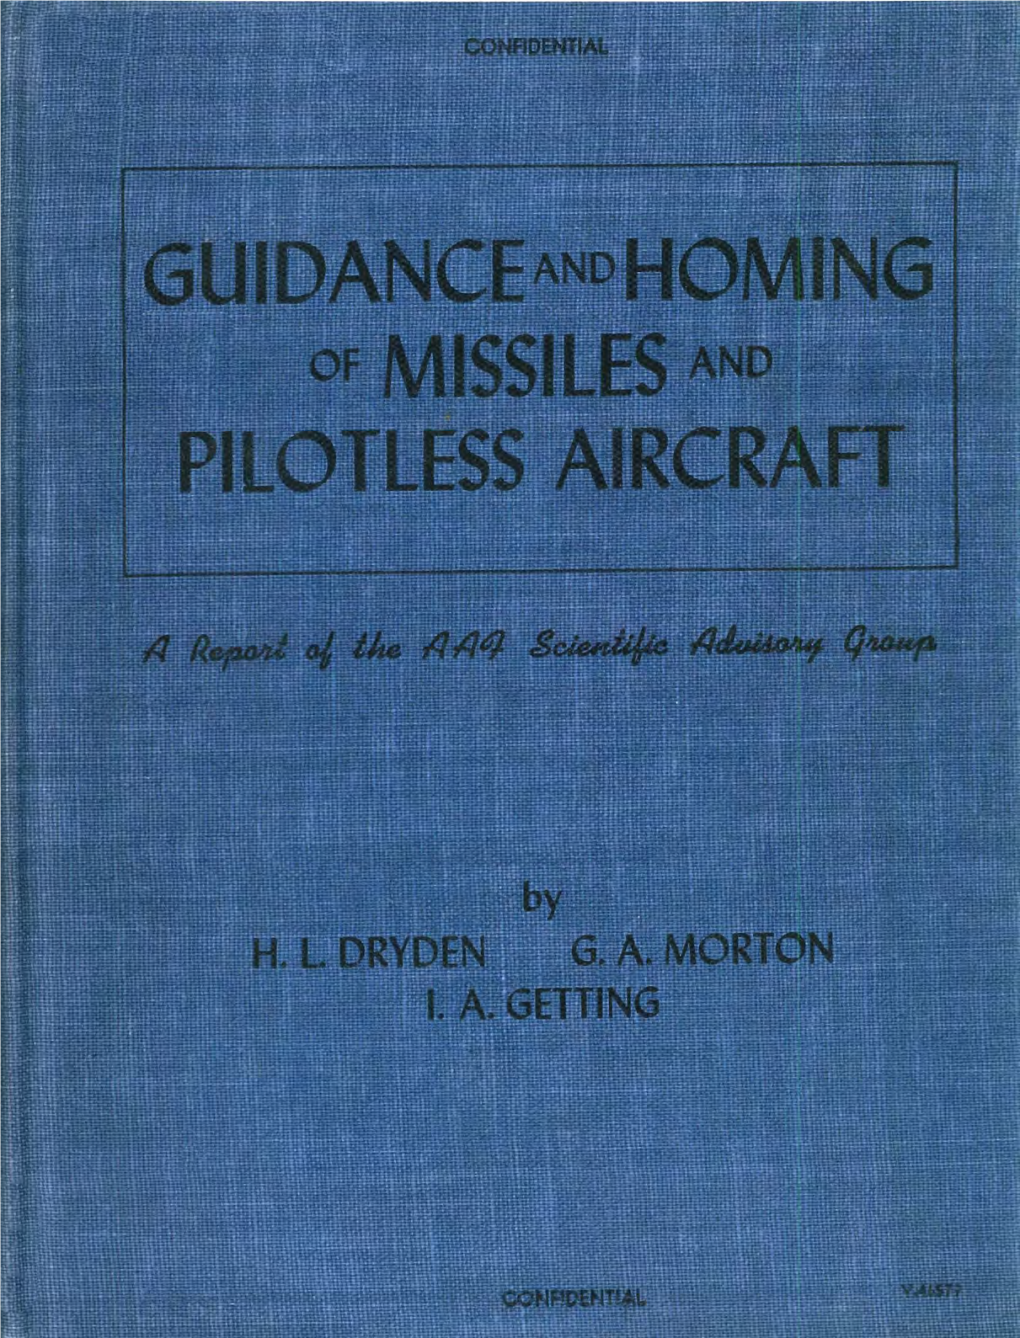 Of Missiles and Pilotless Aircraft